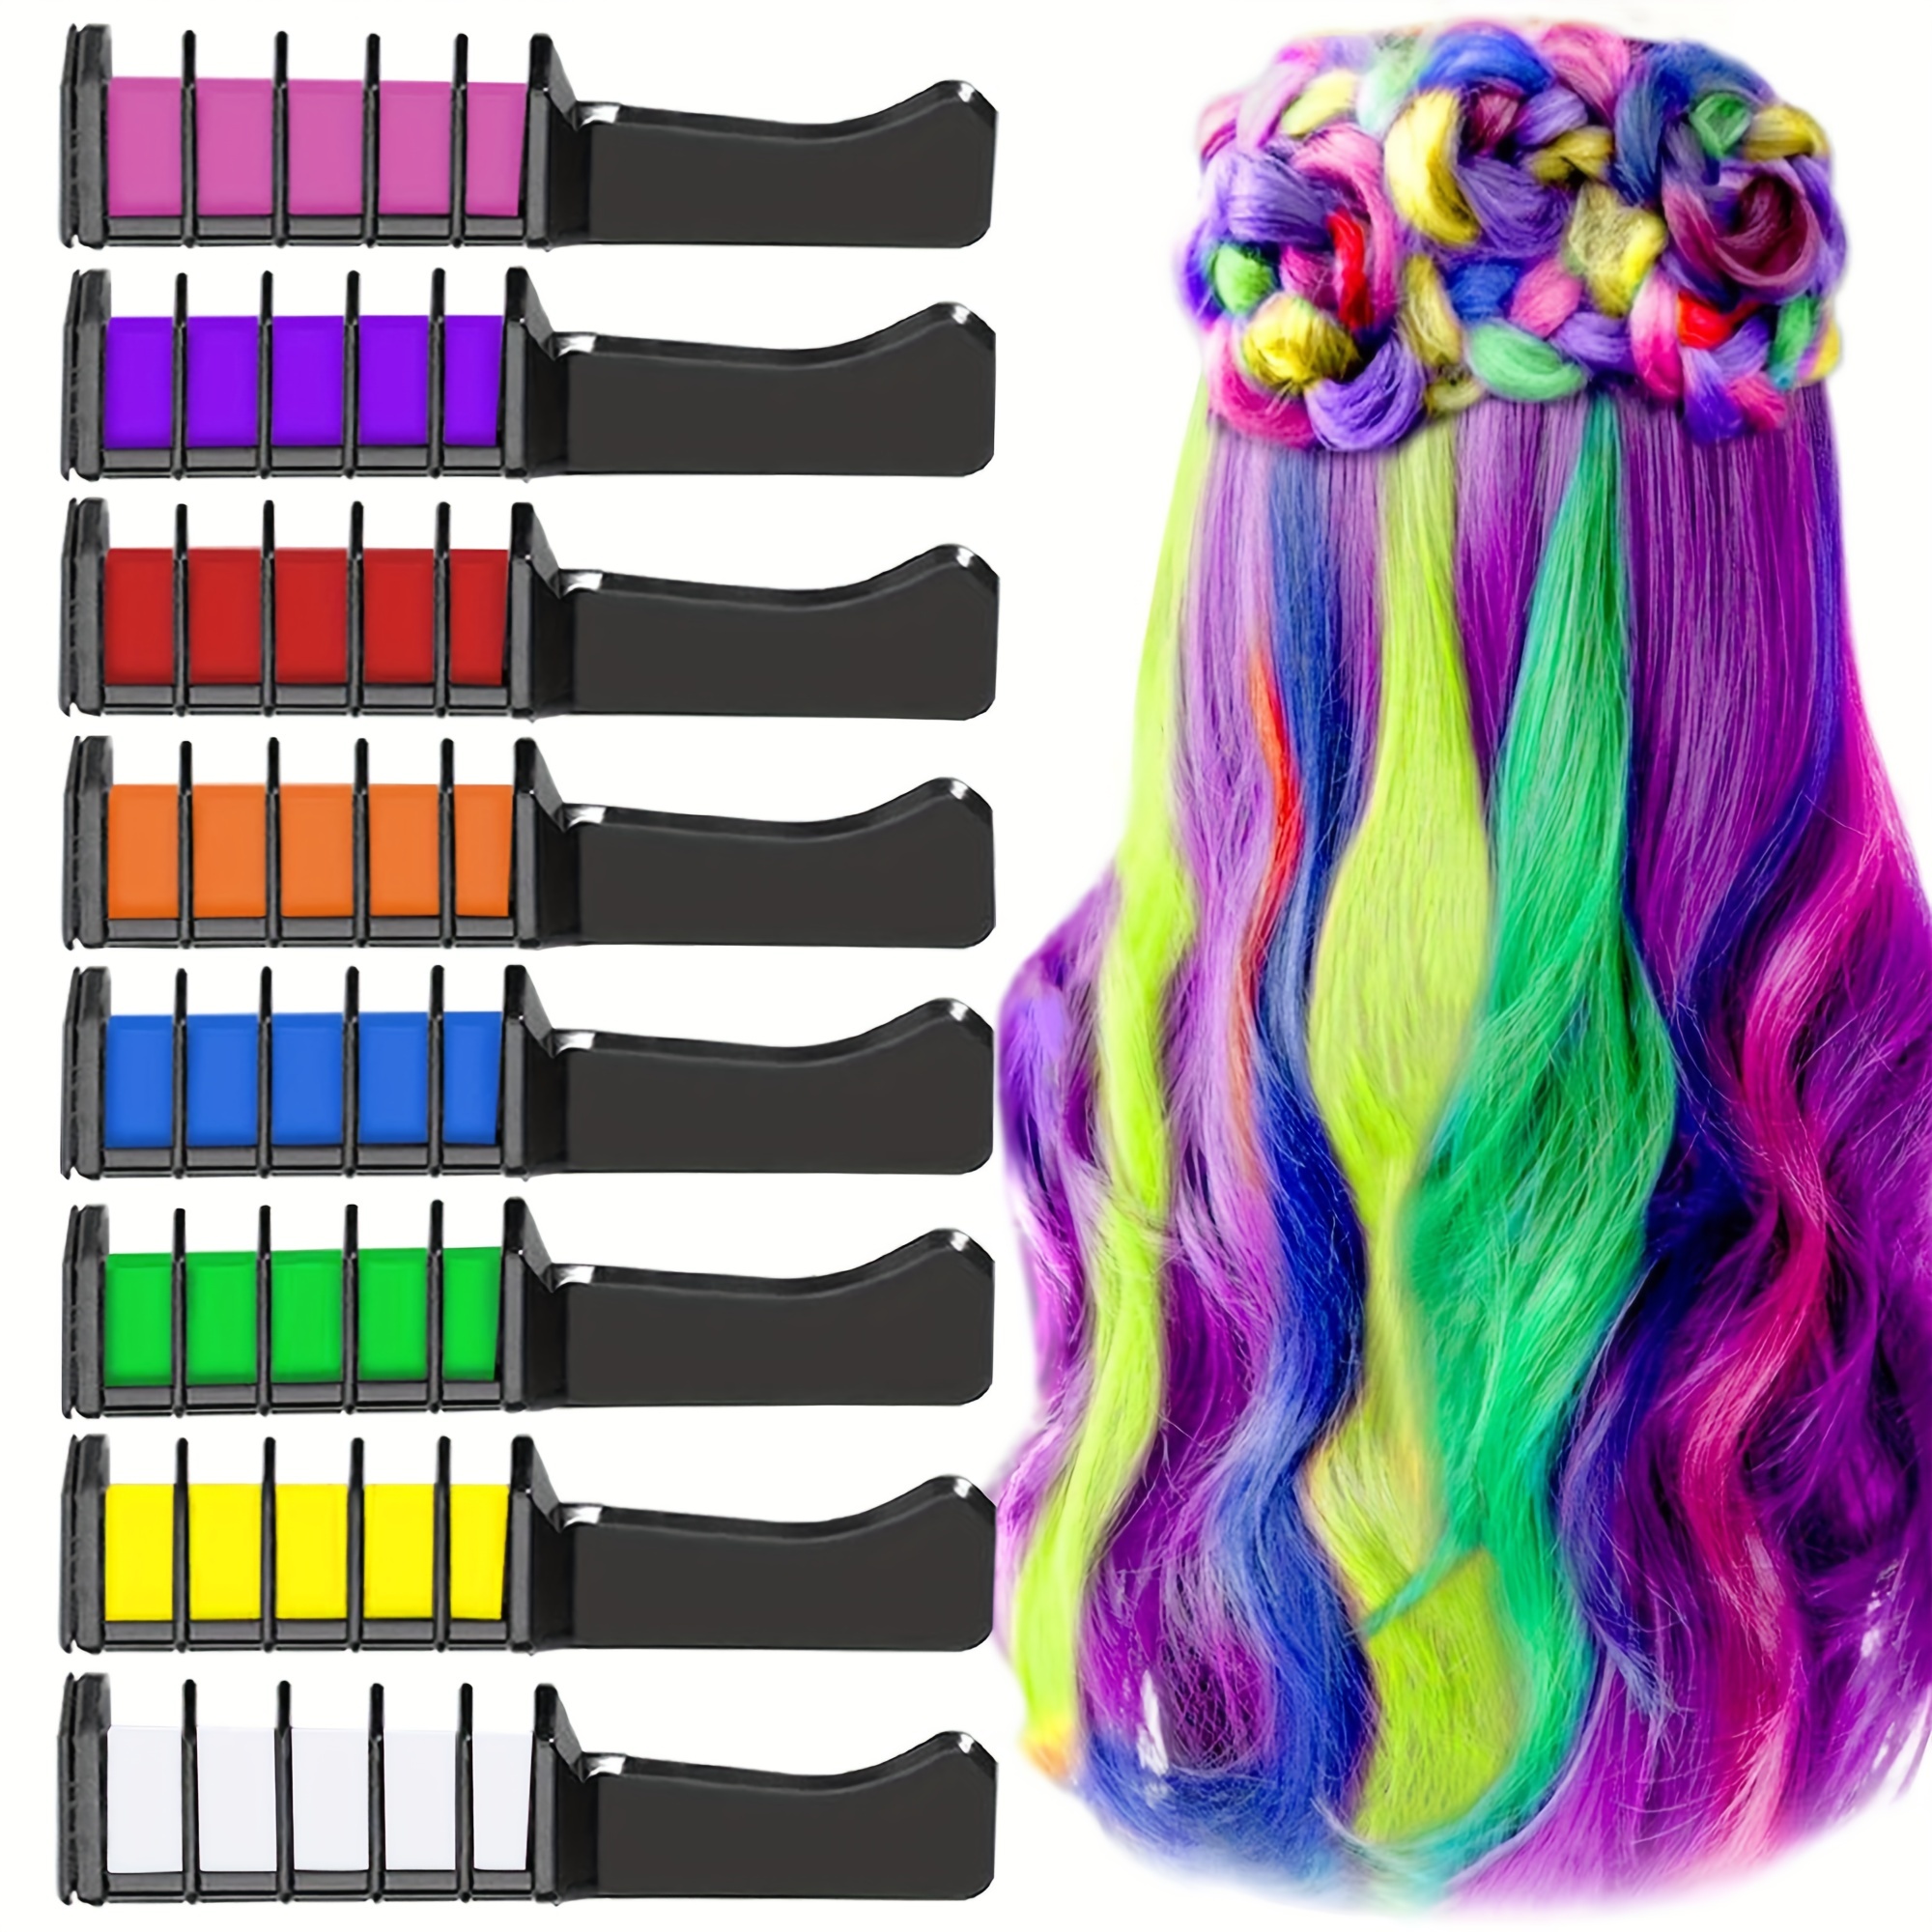 10 Color Hair Chalk for Girls Makeup Kit -New Hair Chalk Comb Temporary  Washable